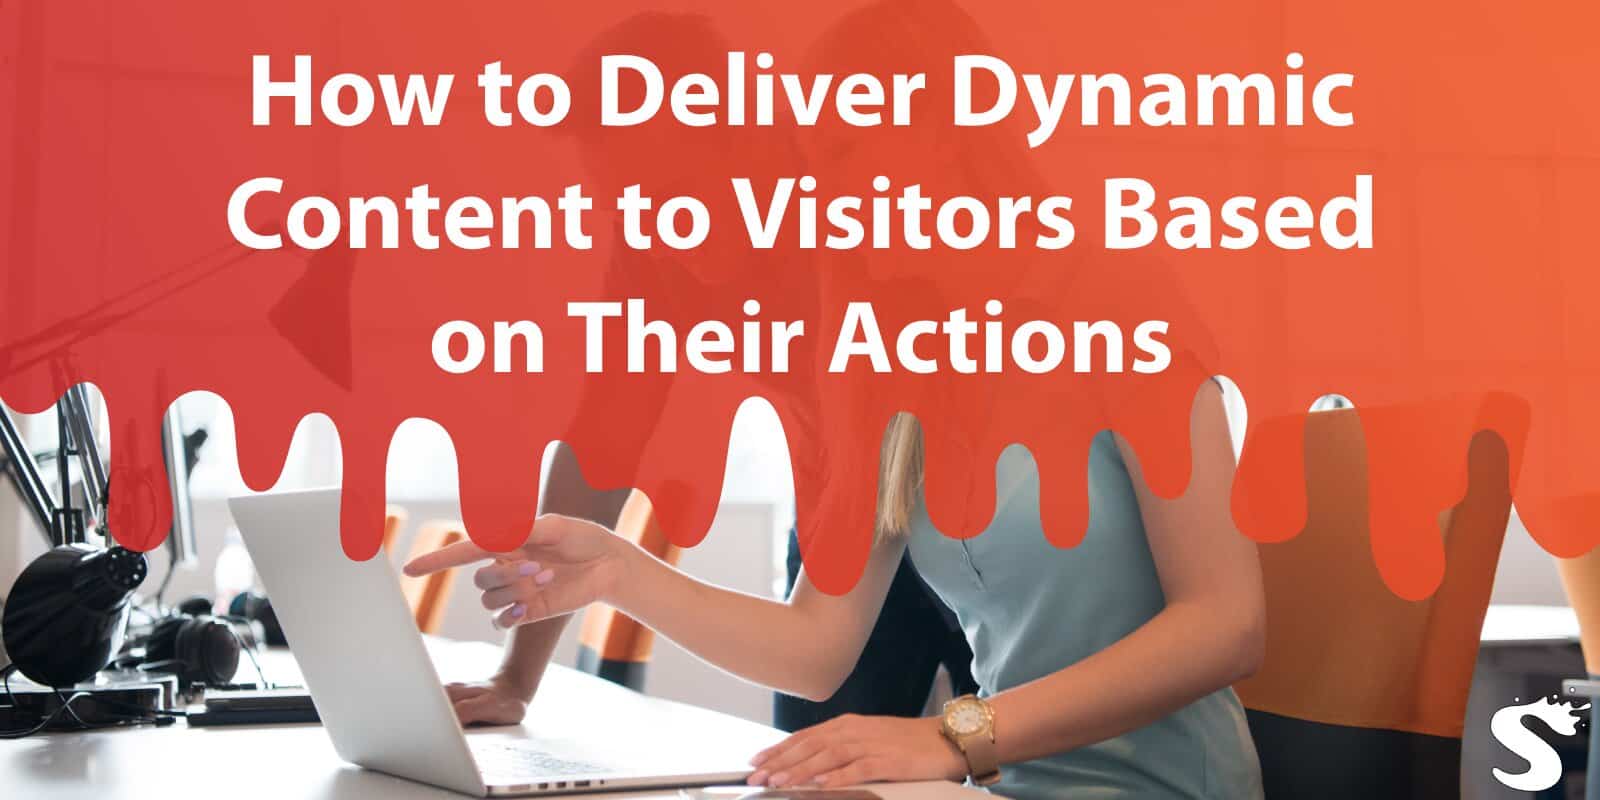 How to Deliver Dynamic Content to Visitors Based on Their Actions